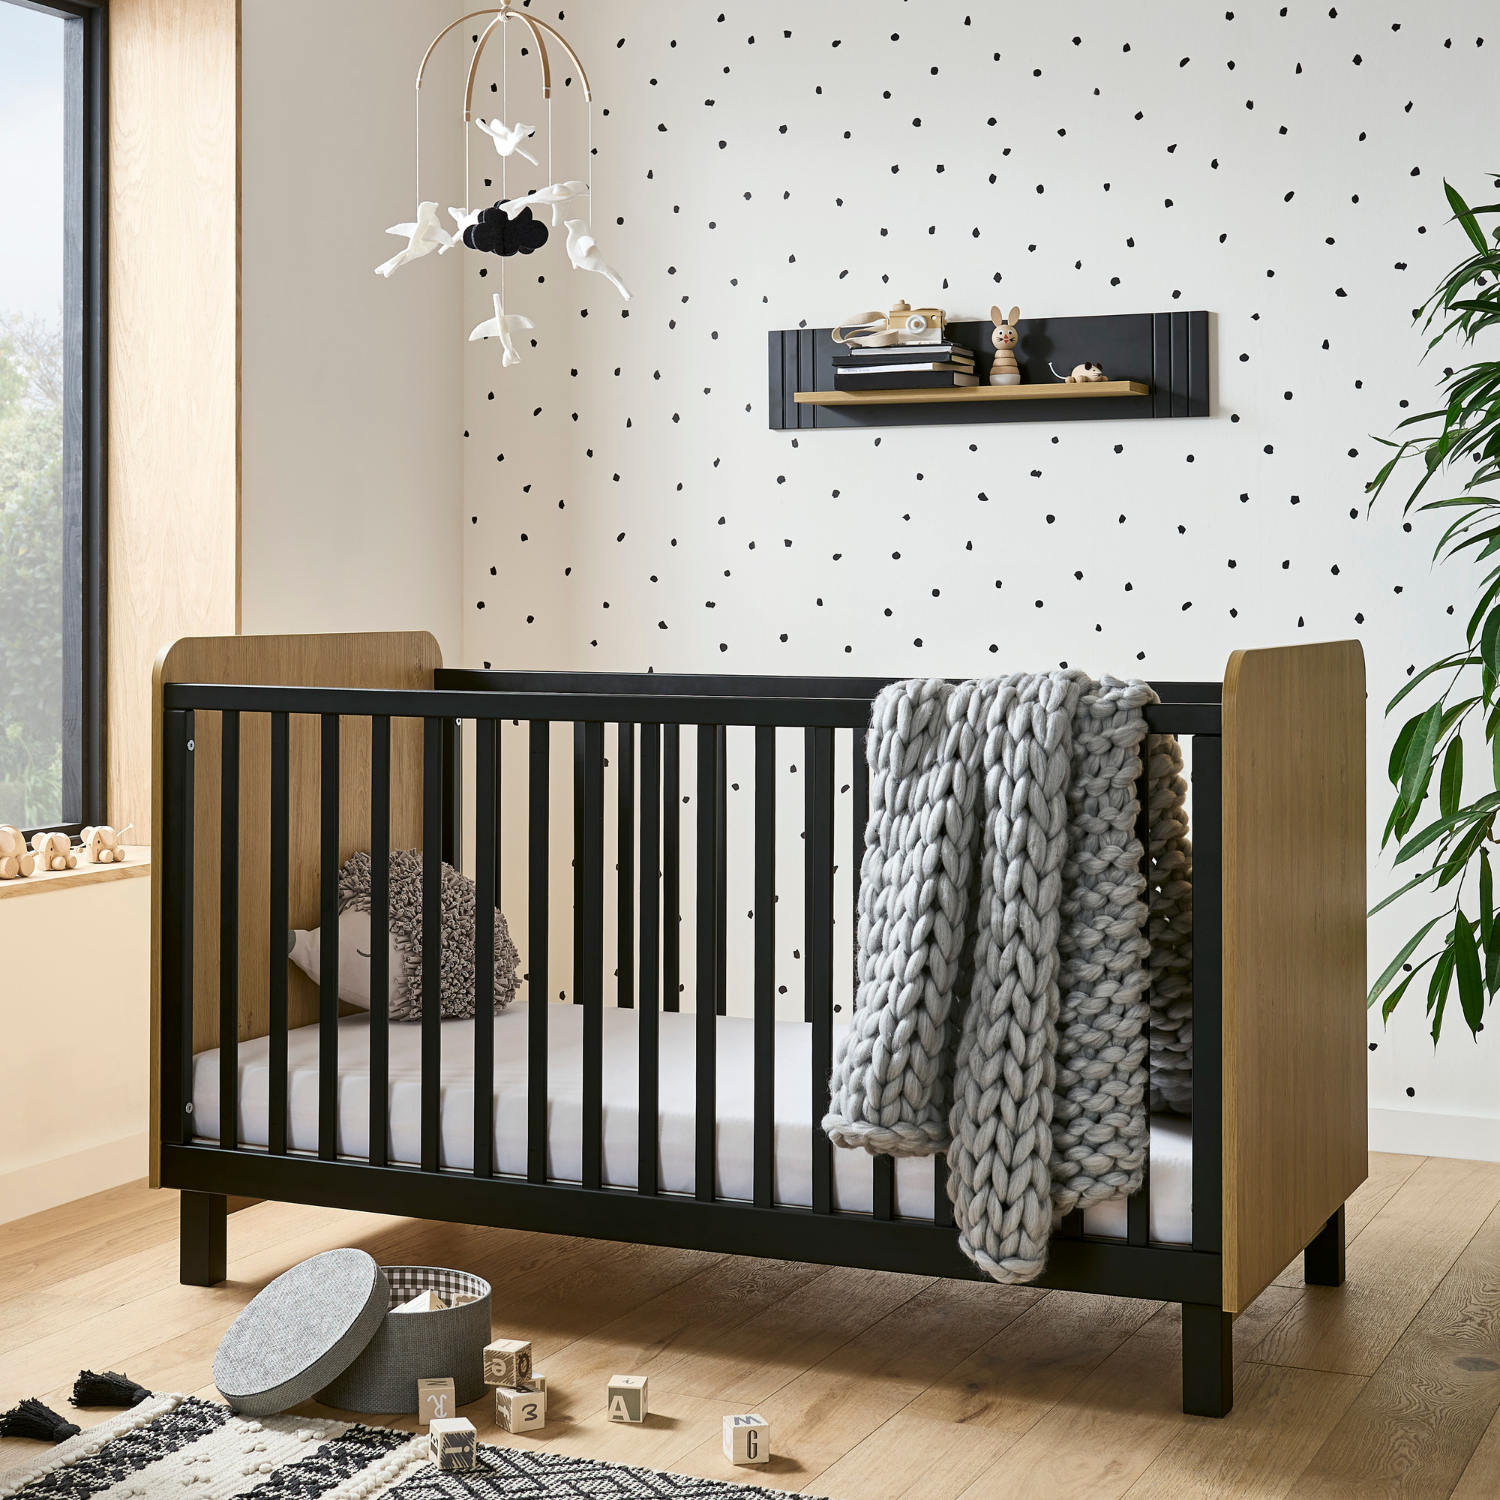 Black CuddleCo Rafi Cot Bed in a white nursery with grey cellular blanket | Nursery Furniture - Clair de Lune UK